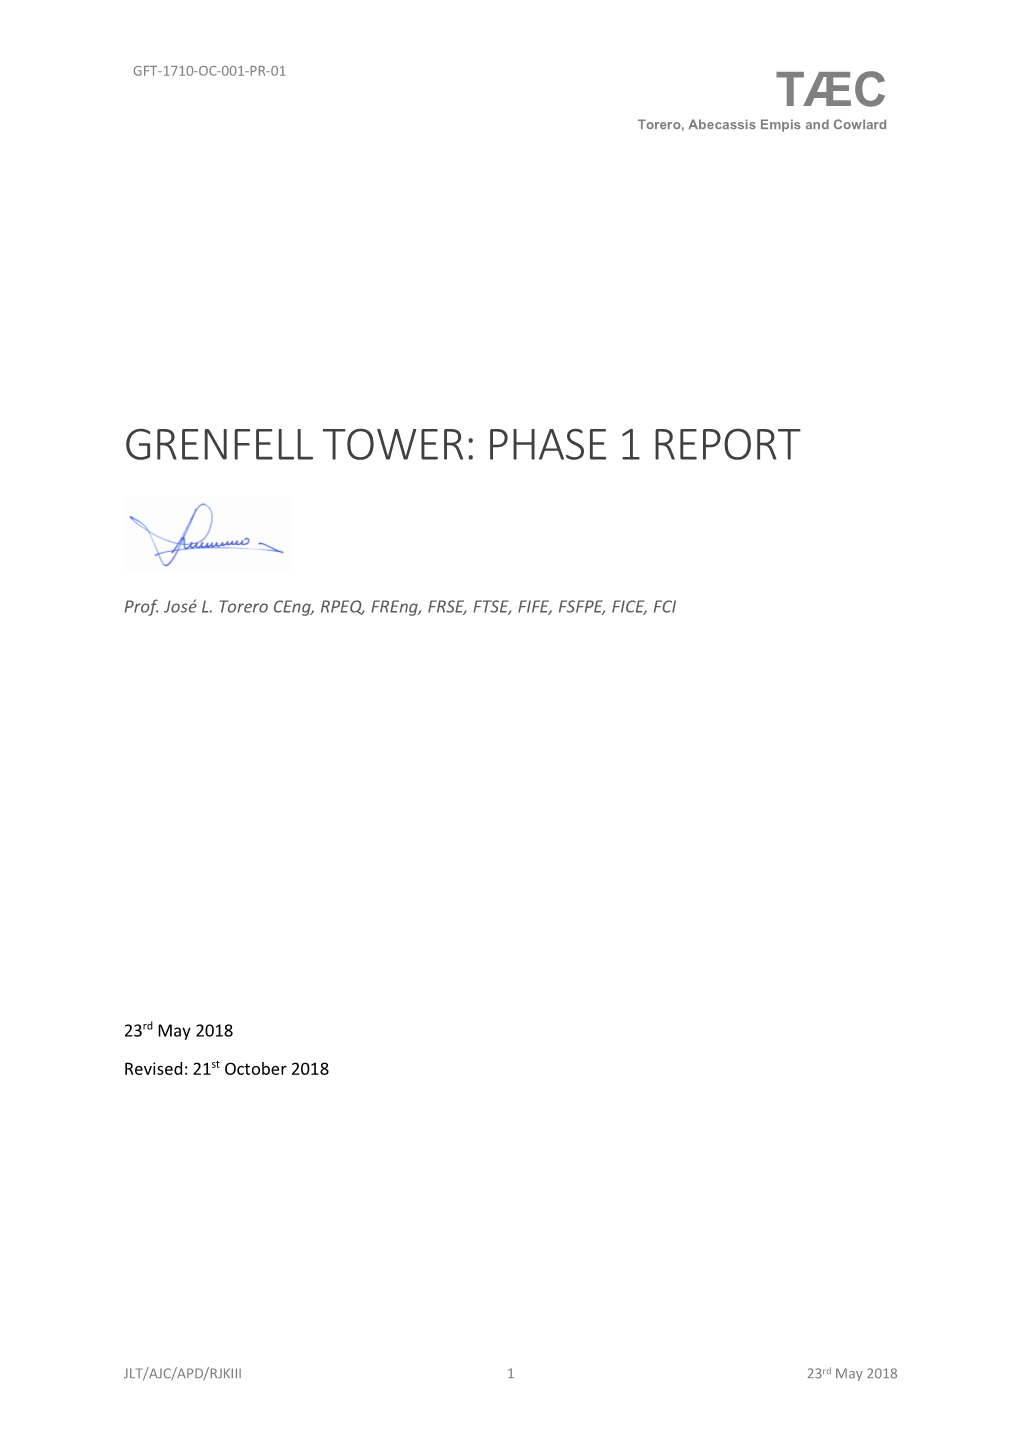 Tæc Grenfell Tower: Phase 1 Report